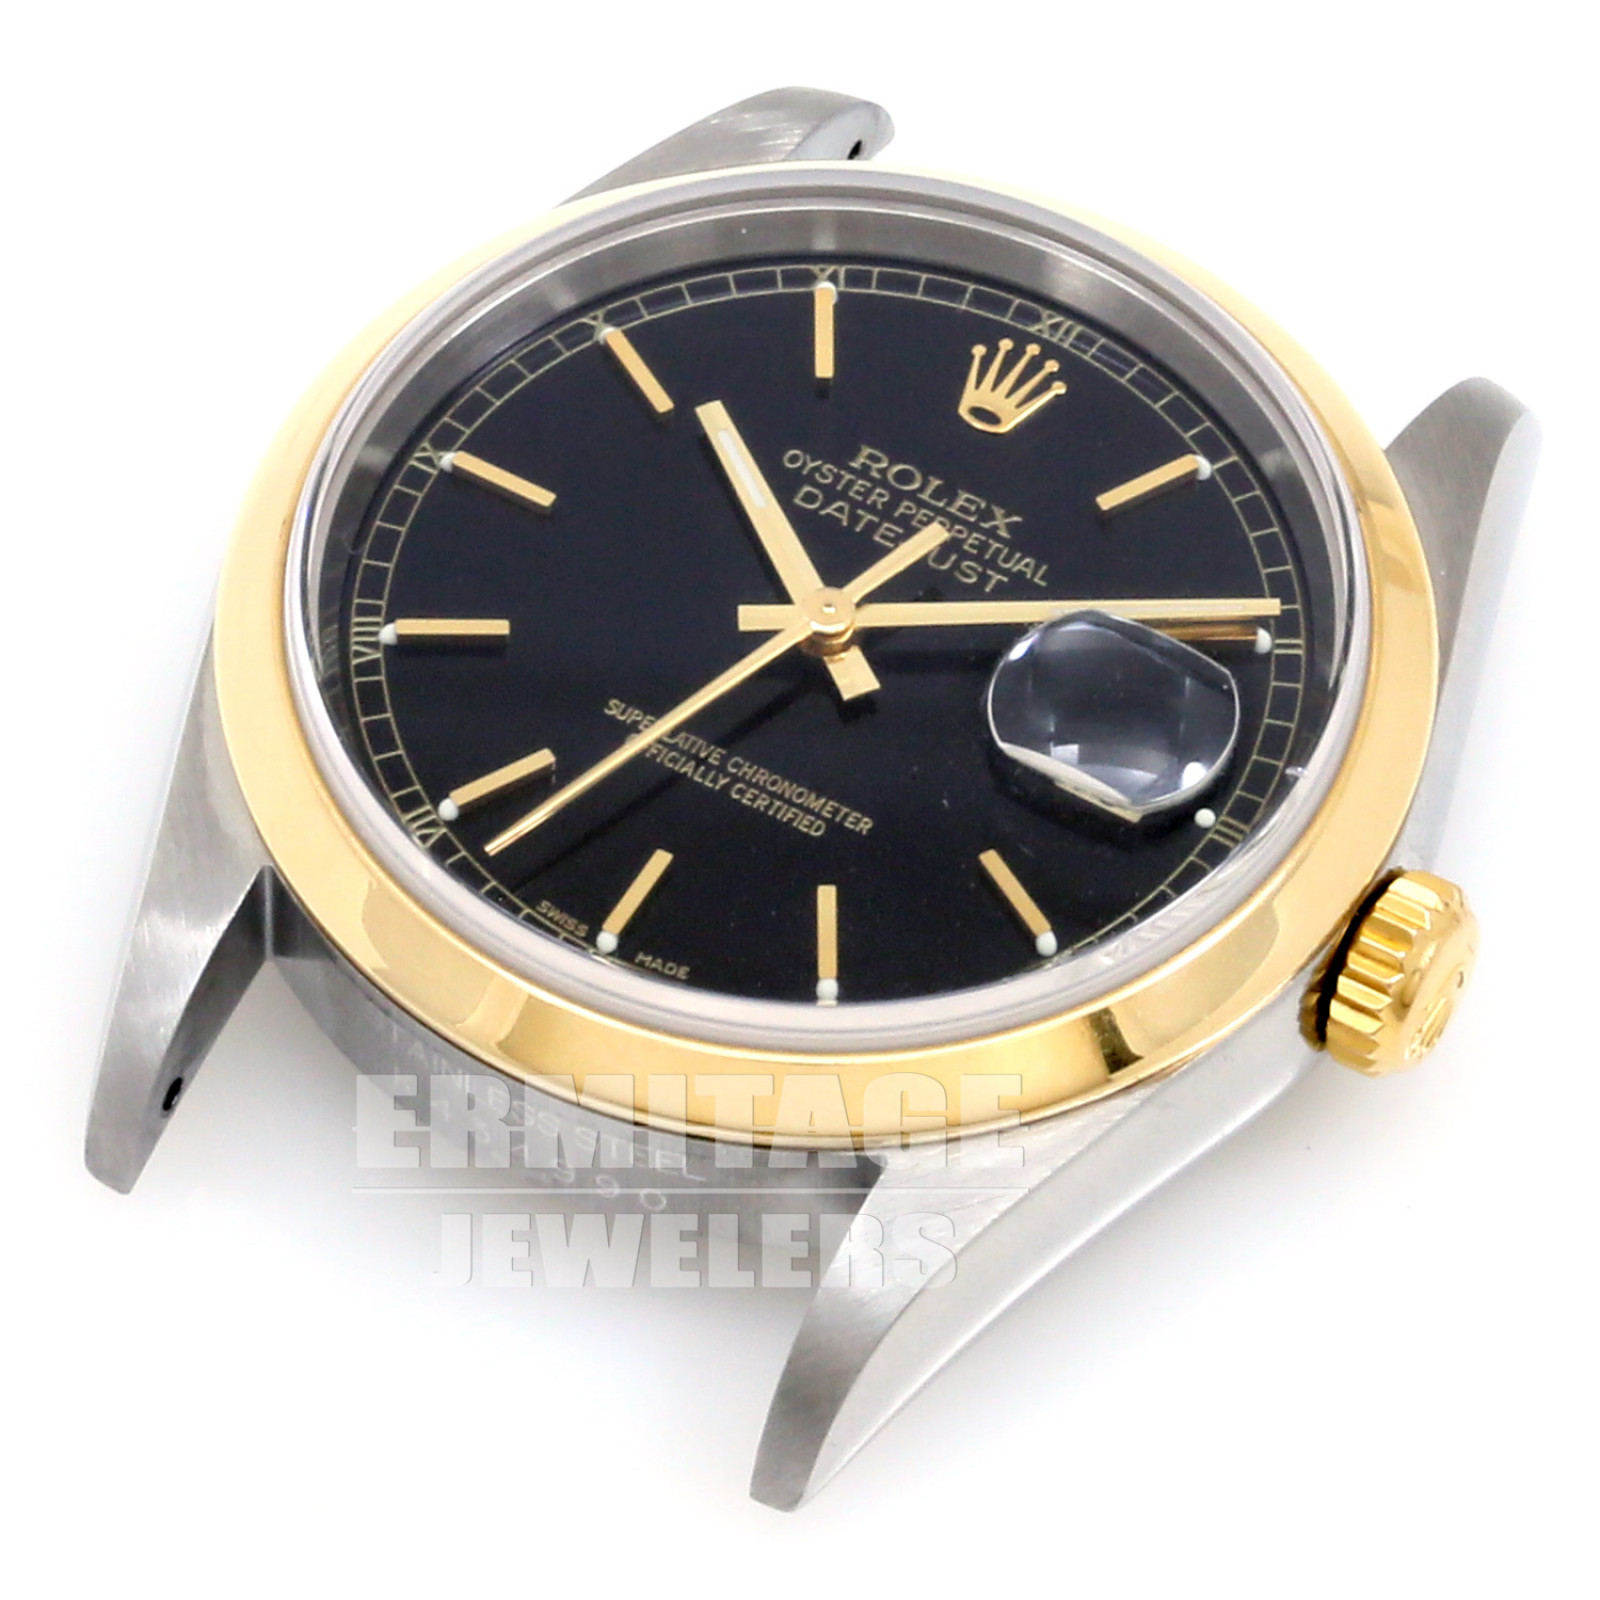 Rolex Datejust 16203 with Black Dial